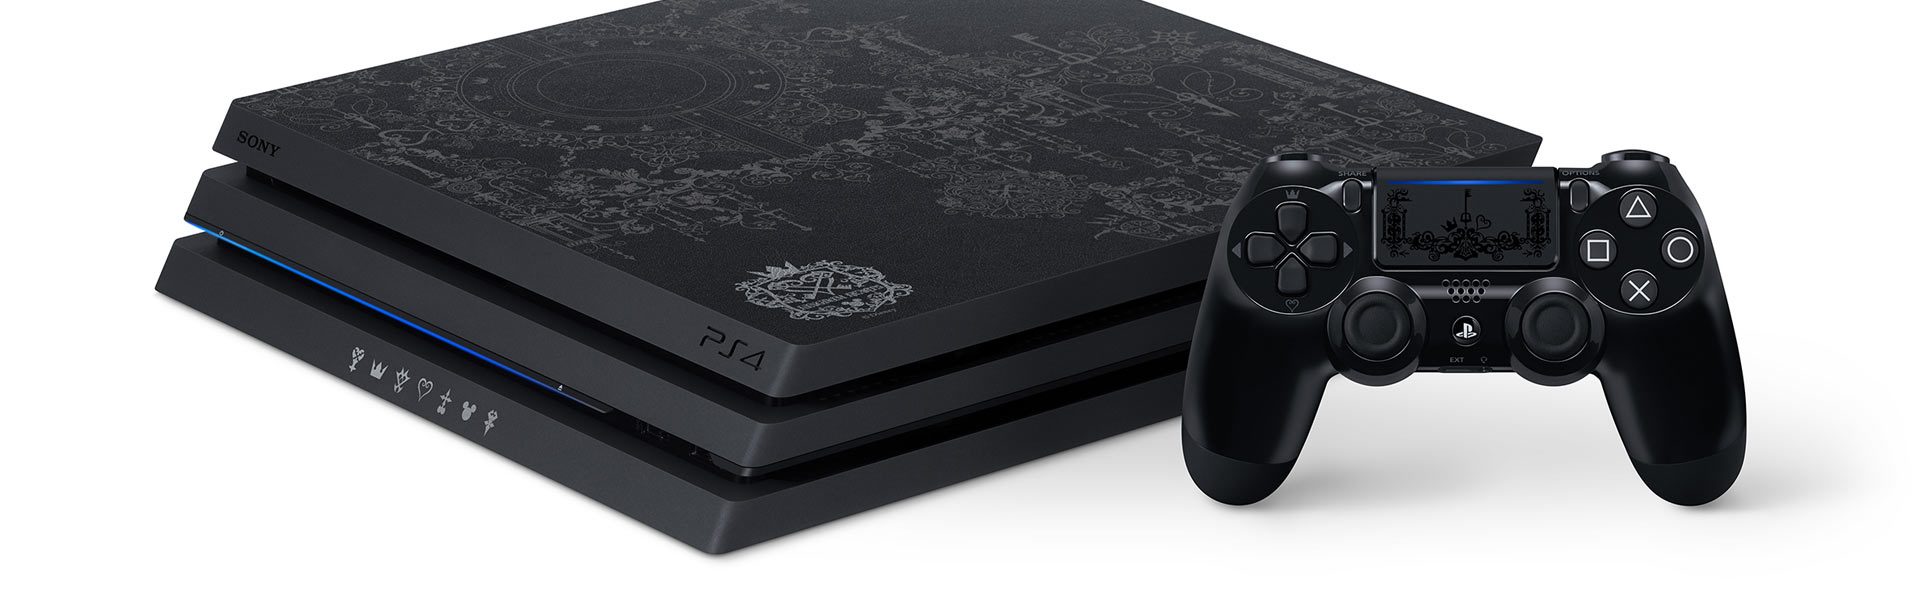 Announcing The Kingdom Hearts Iii Ps4 Pro Limited Edition Bundle Playstation Blog